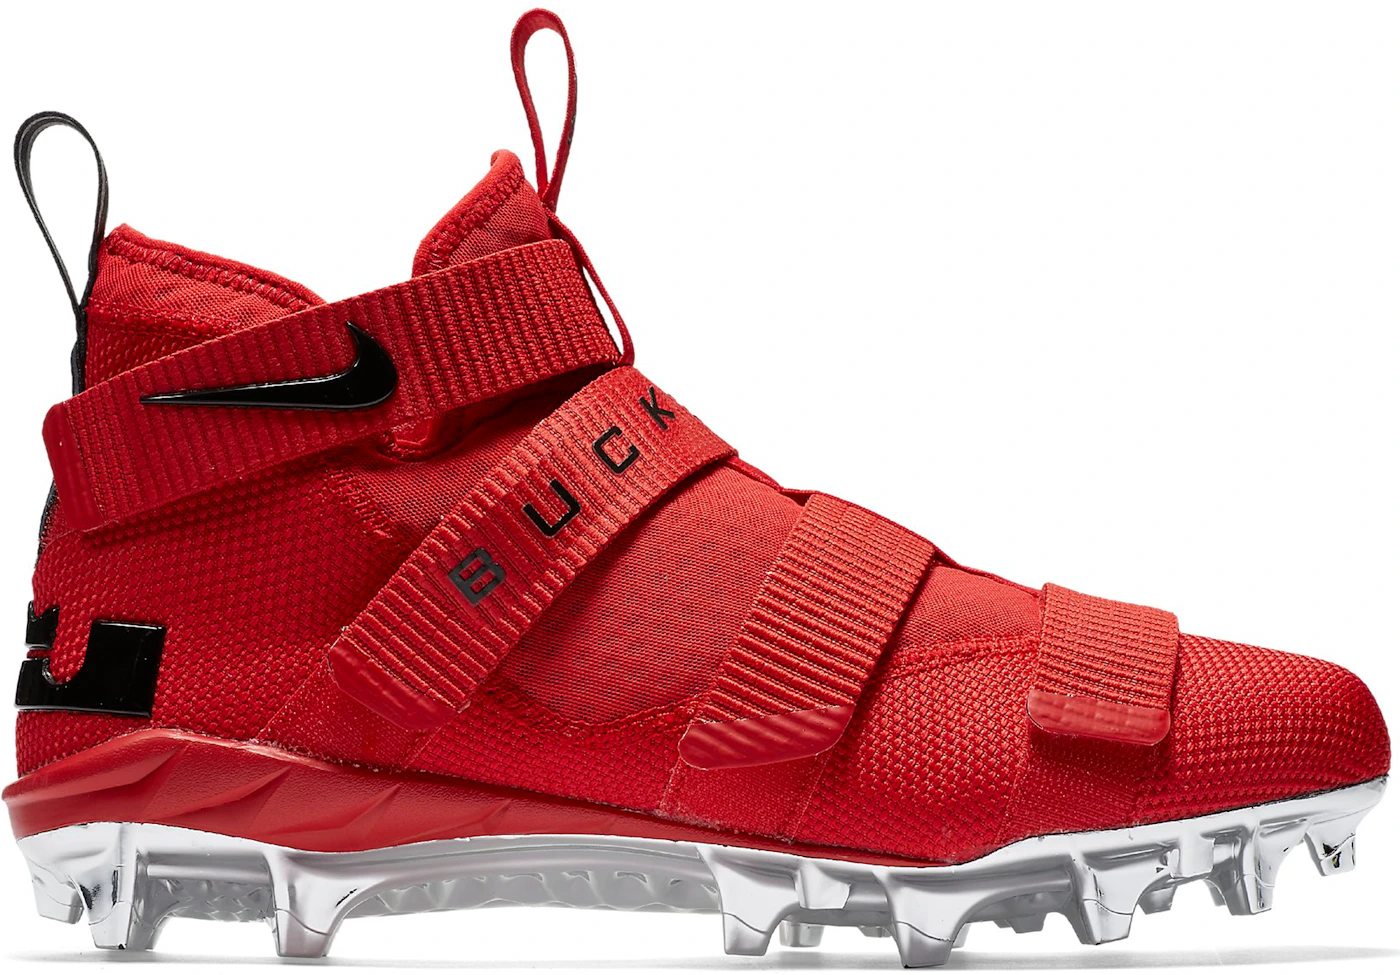 Nike LeBron Zoom Soldier 11 Cleat Ohio State PE Men's - AO9146-600 - GB